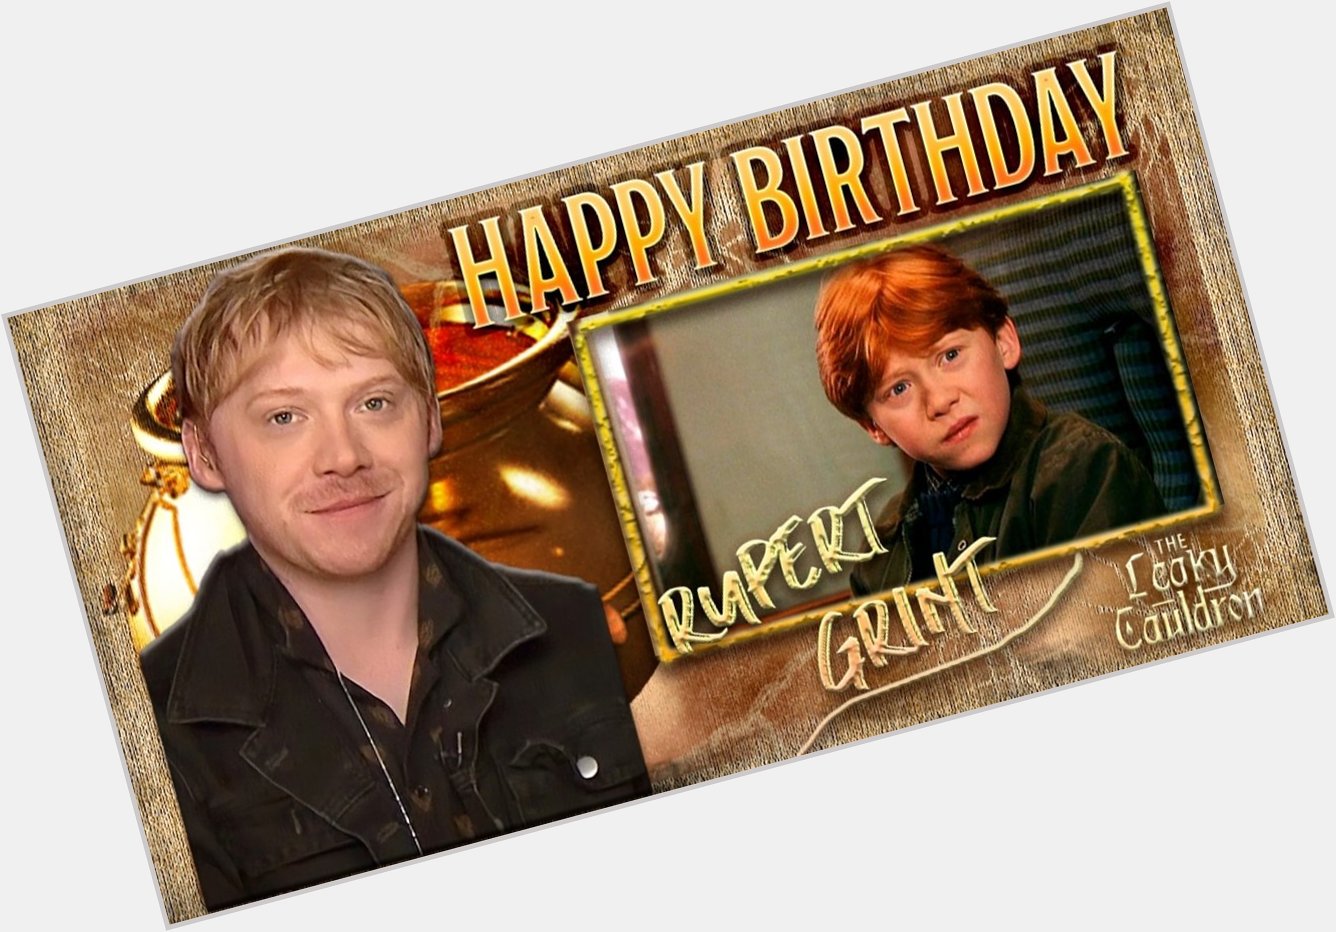 Happy birthday to our Rupert Grint . Well known as our Ronald Weasley  